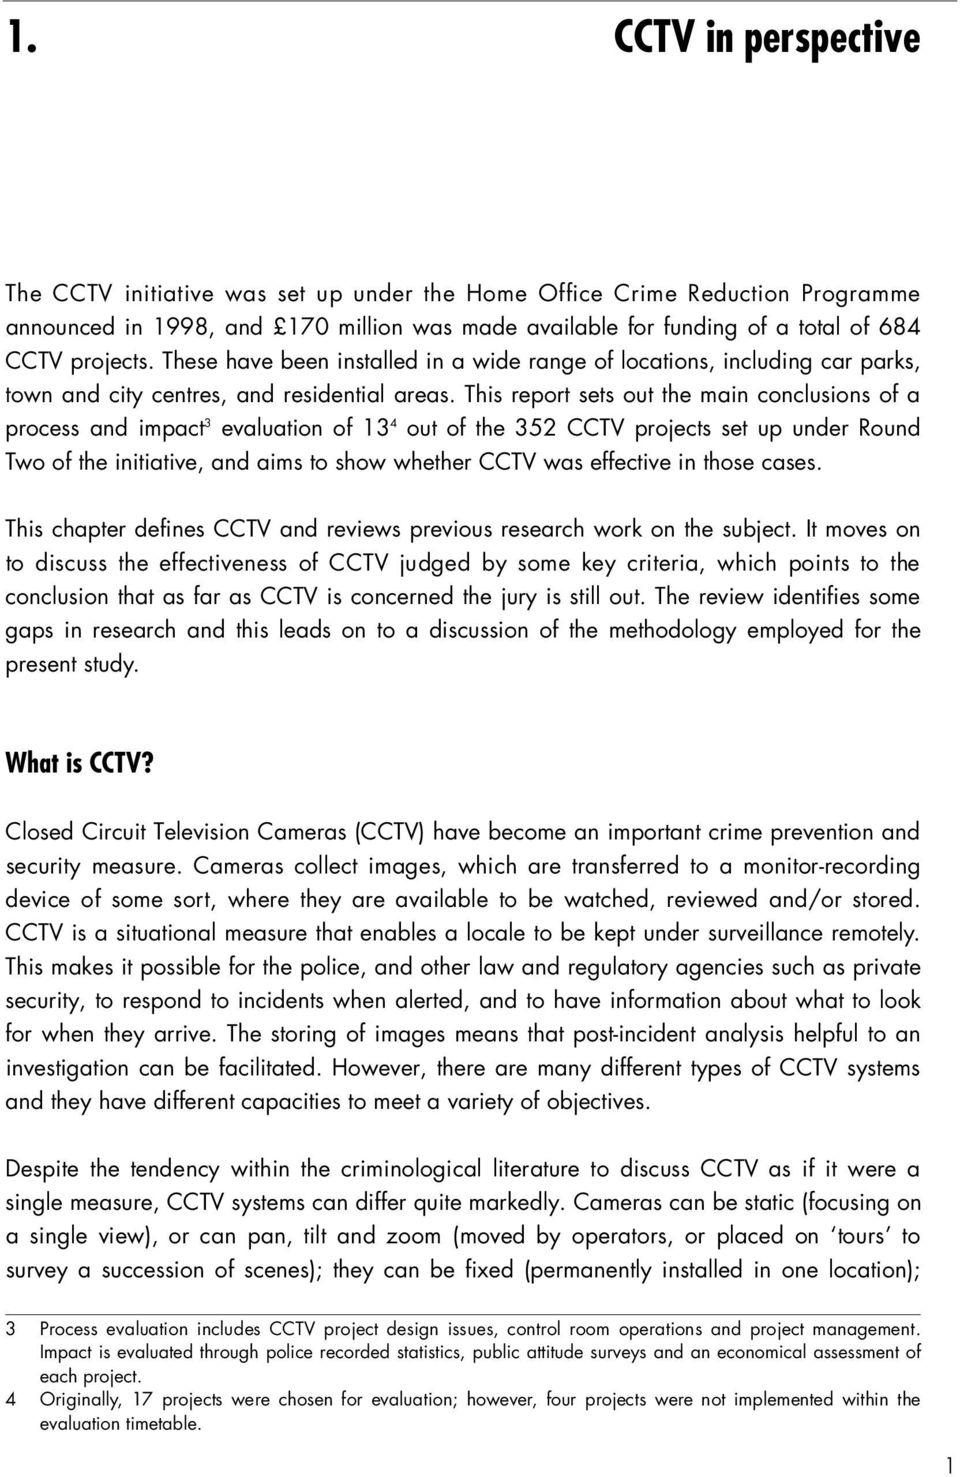 This report sets out the main conclusions of a process and impact 3 evaluation of 13 4 out of the 352 CCTV projects set up under Round Two of the initiative, and aims to show whether CCTV was